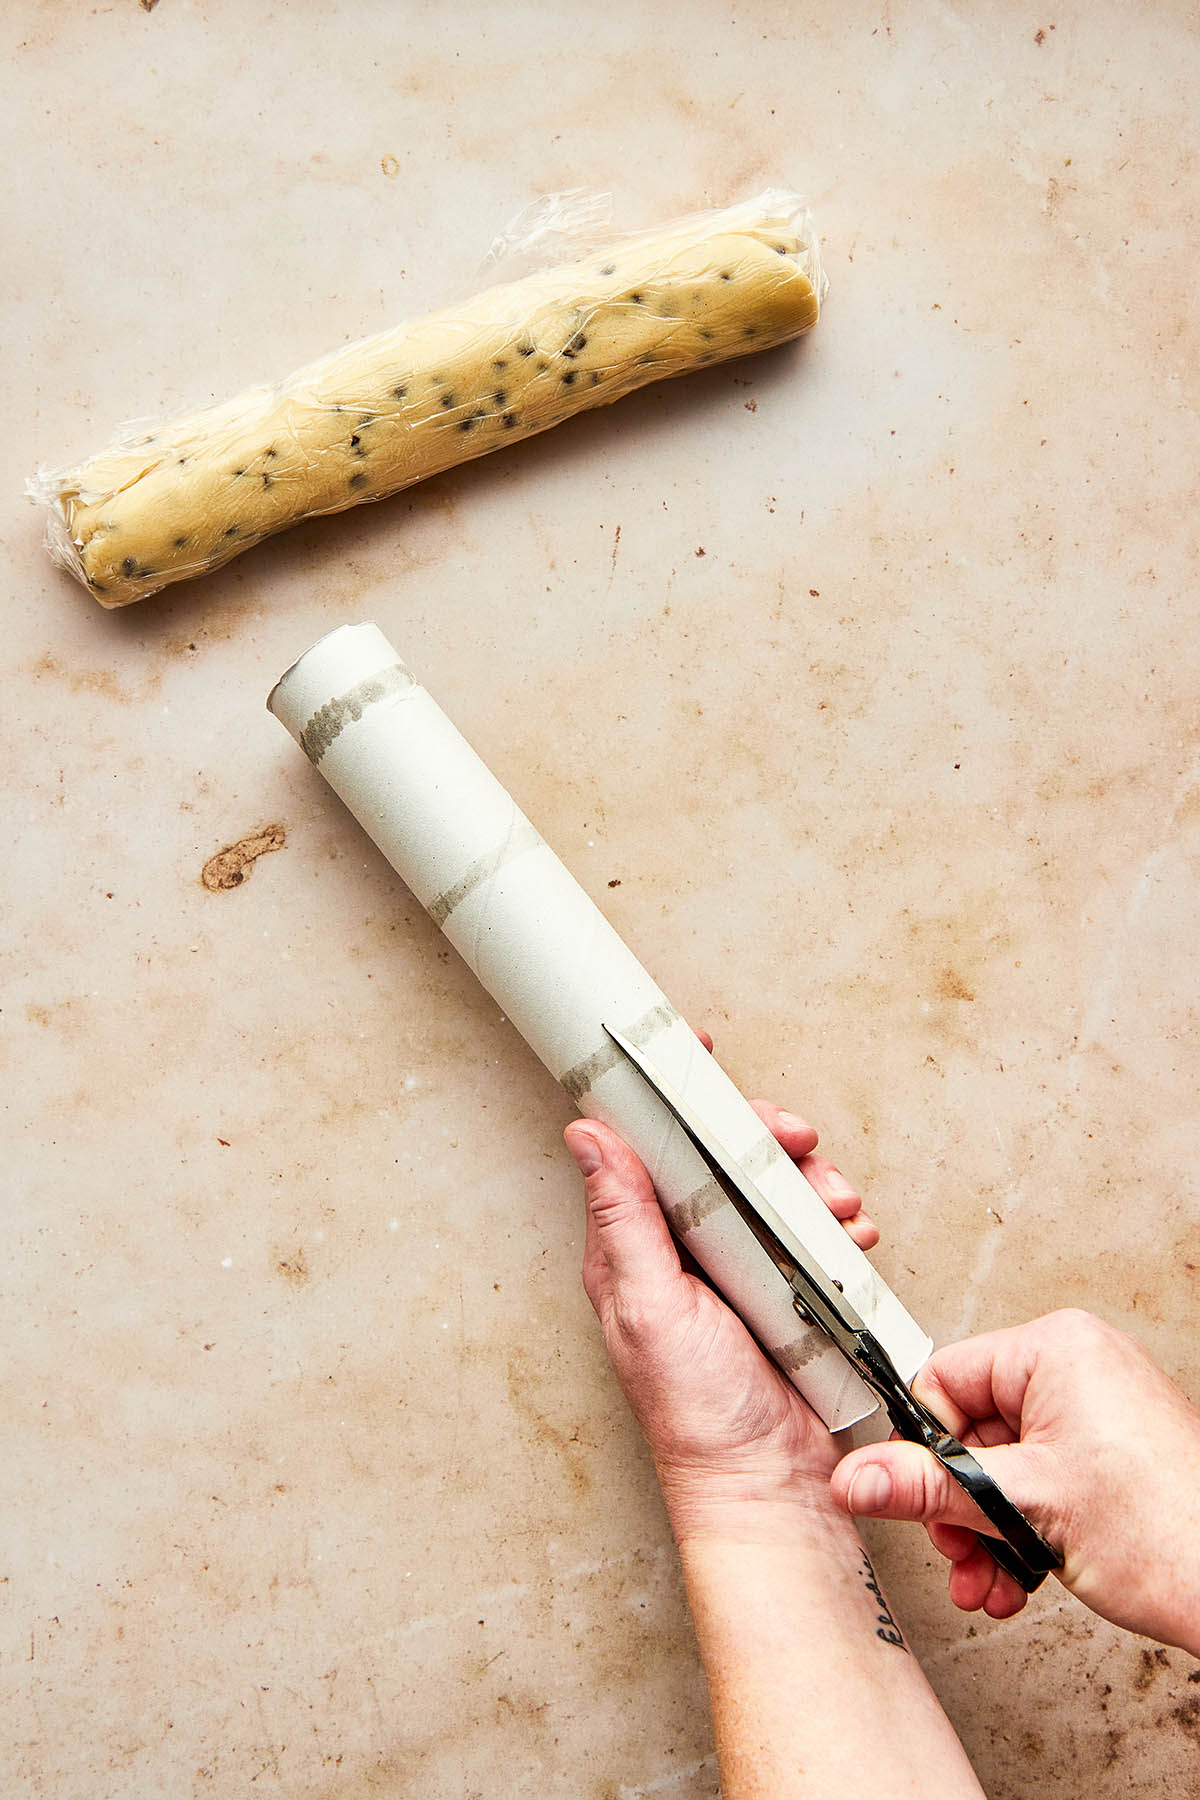 Hands using scissors to cut a cardboard paper towel tube down it's length. A wrapped log of cookie dough is nearby.